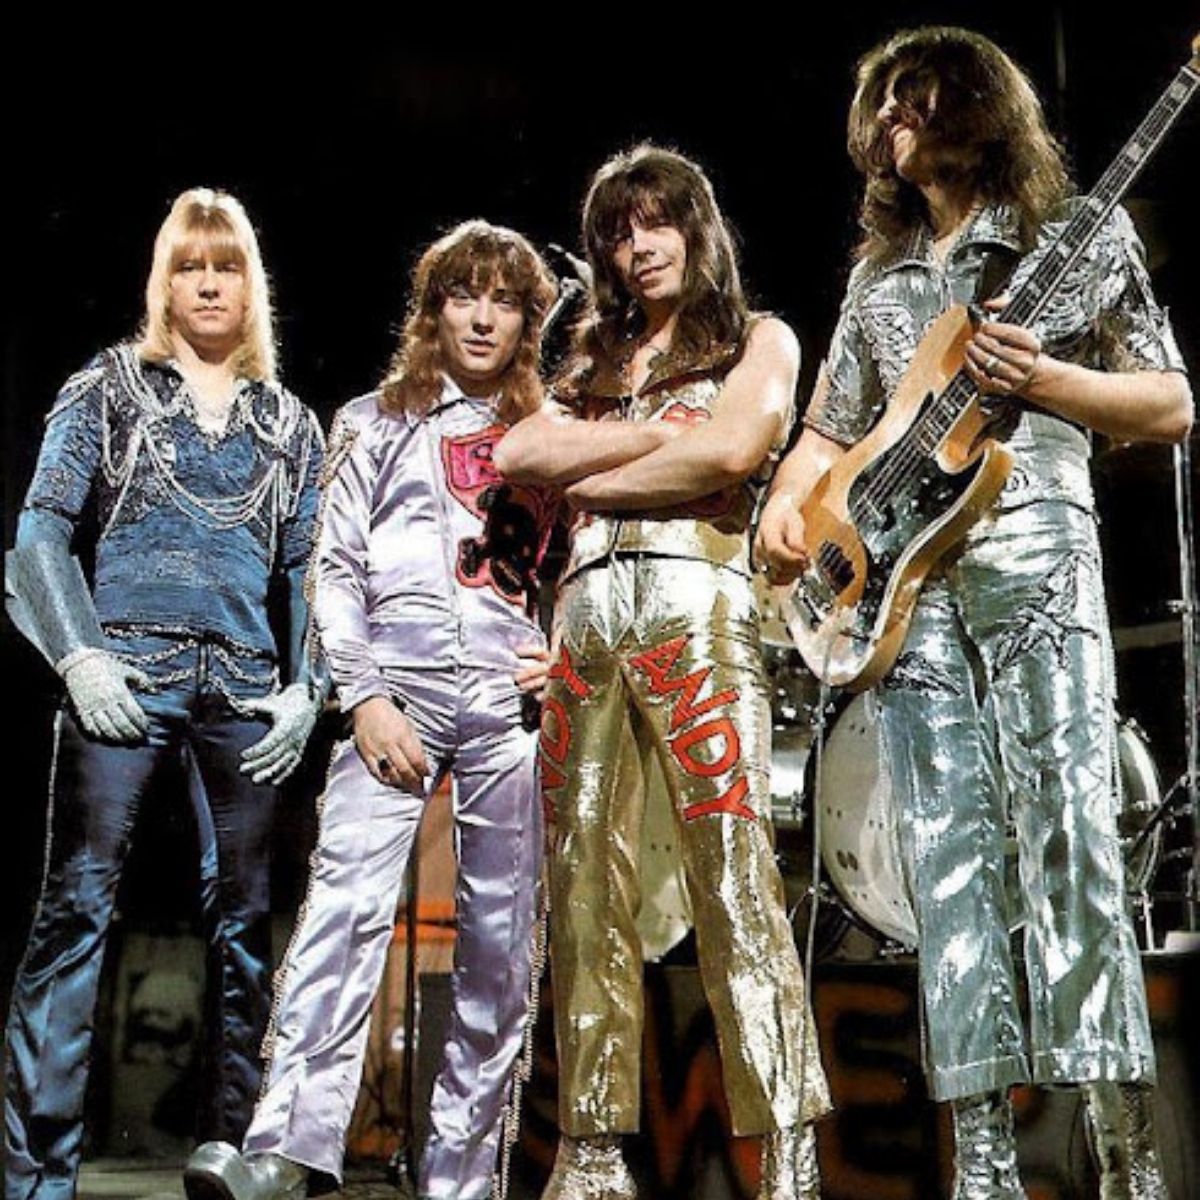 The group "Sweet" in the 80s